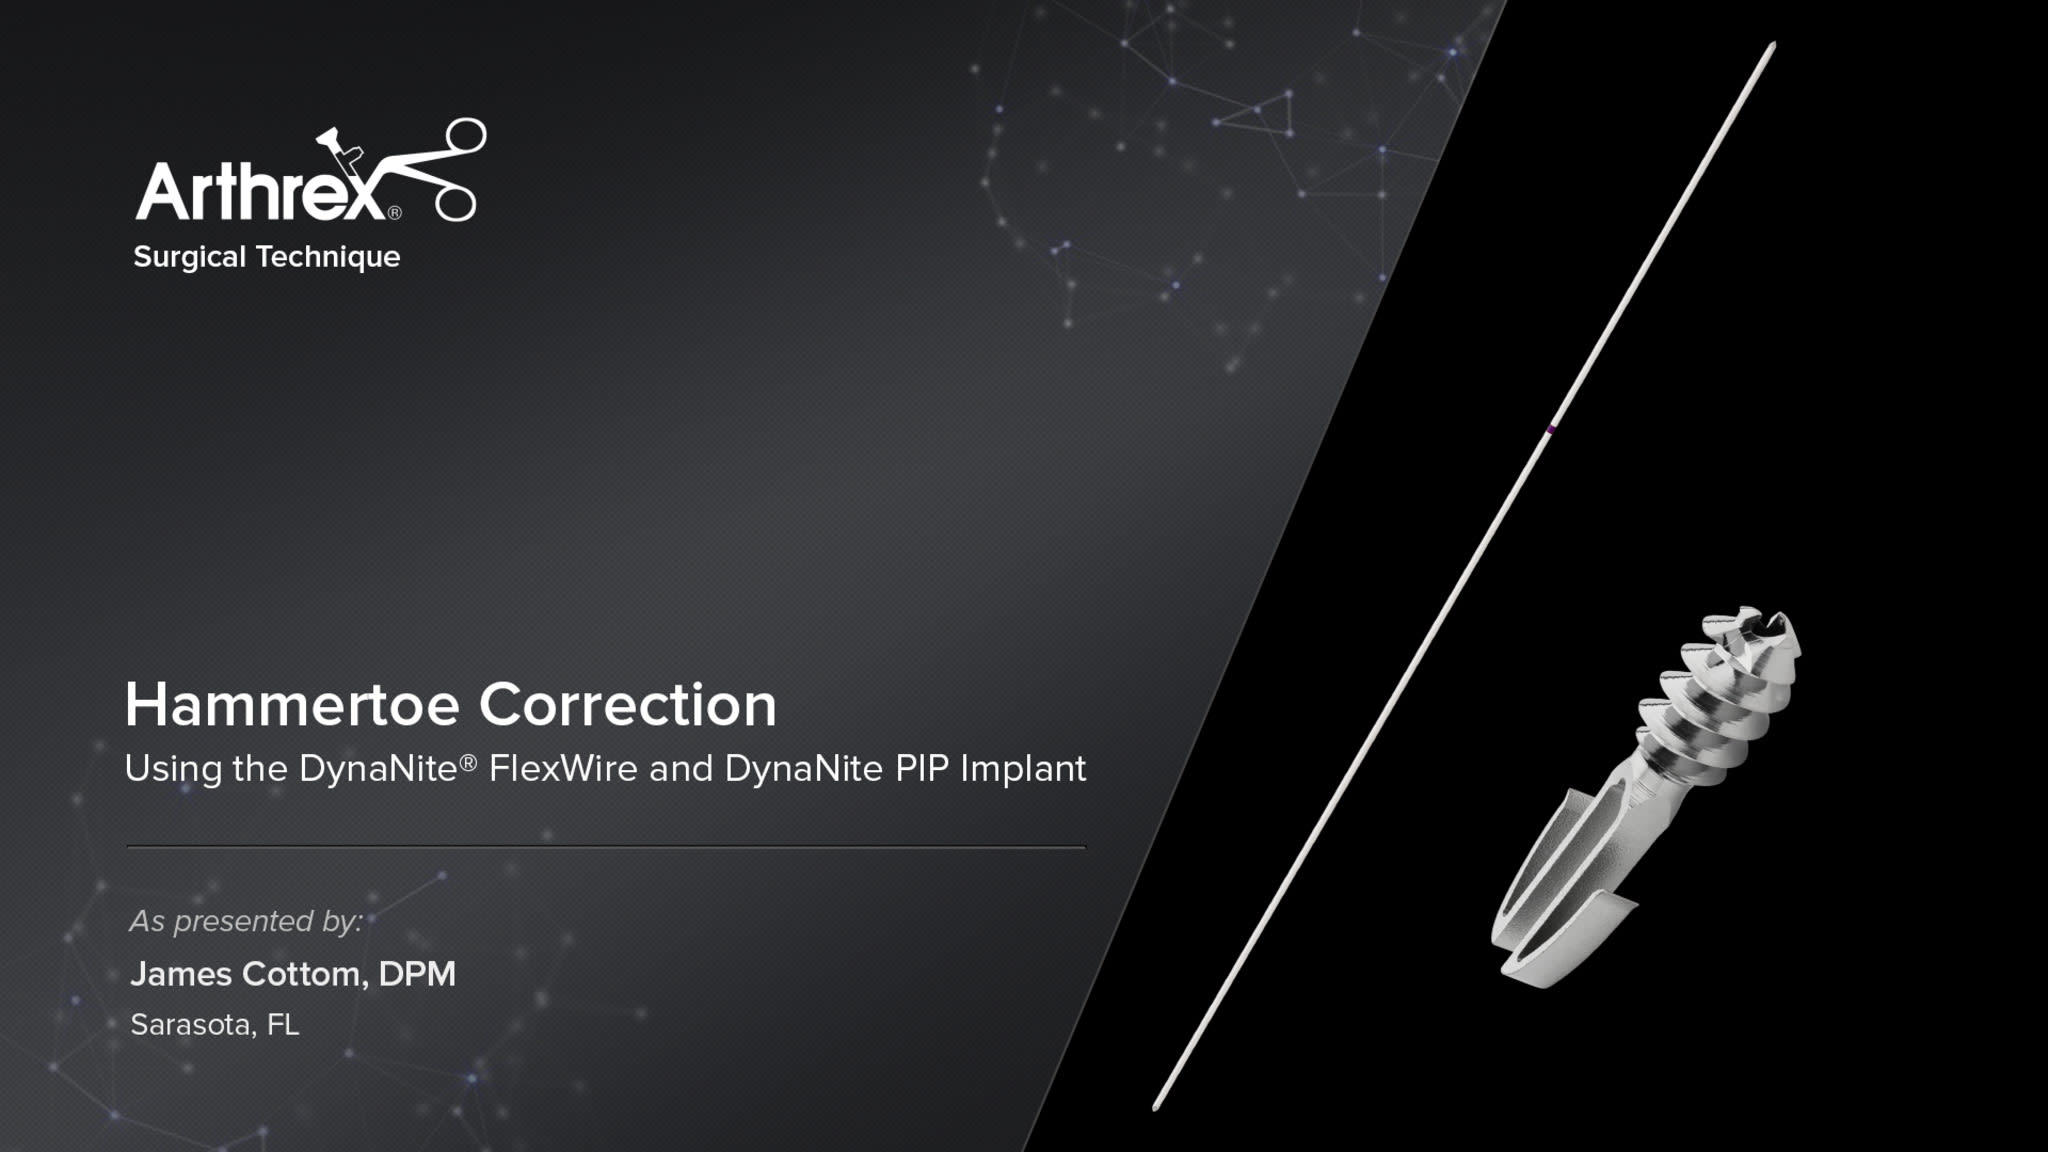 DynaNite® FlexWire and DynaNite PIP Implant for Hammertoe Correction